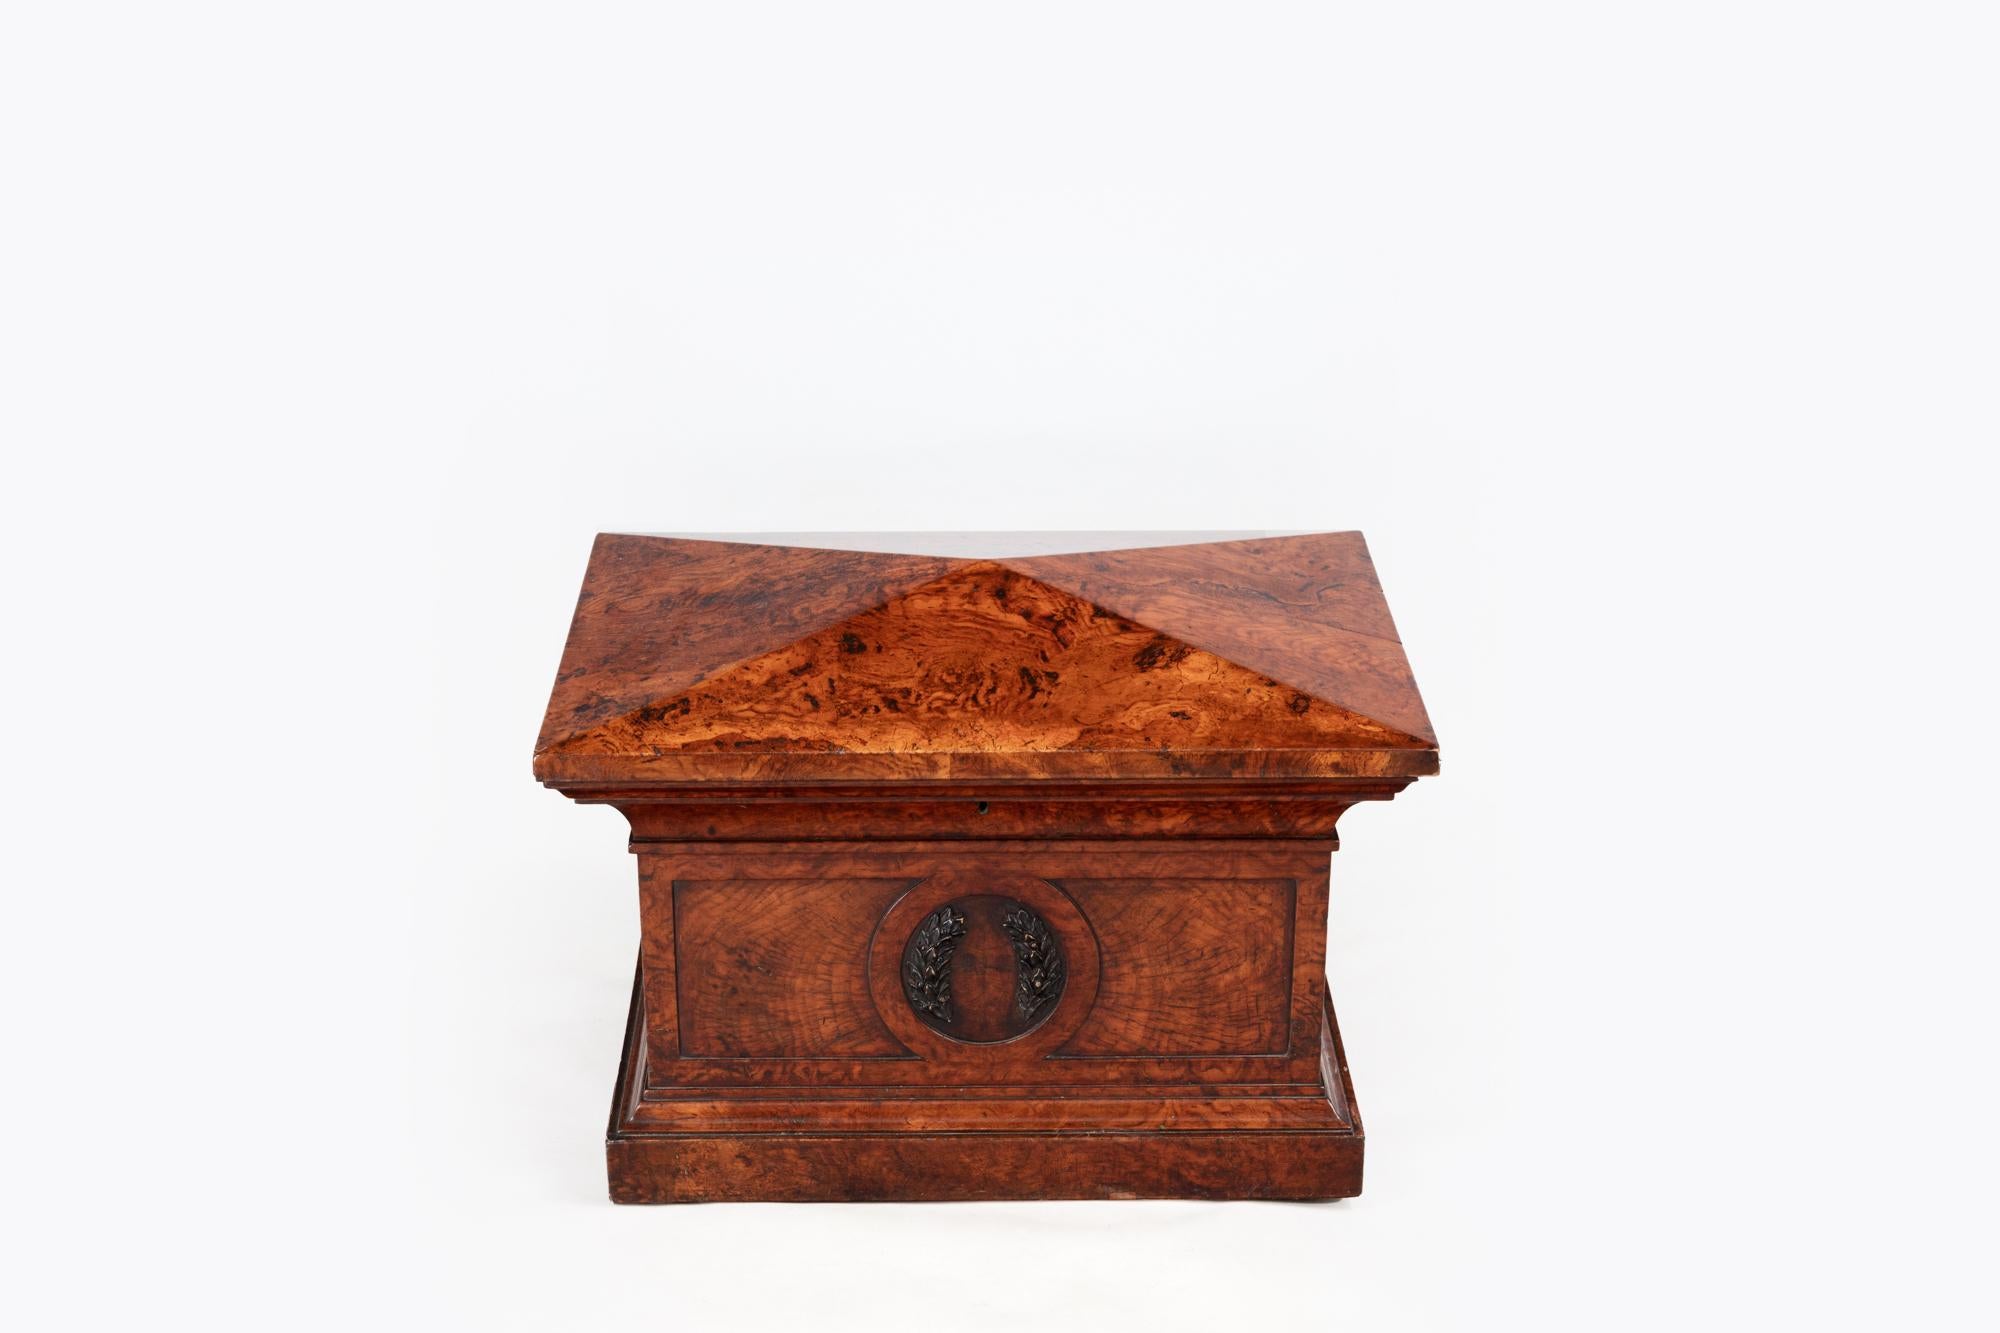 19th Century late Regency pollard oak sarcophagus form cellarette stamped Wilkinsons & Sons, 14 Ludgate Hill, the hinged lid enclosing a six division lined interior with brass ratchet support. The front features a carved laurel wreath motif within a